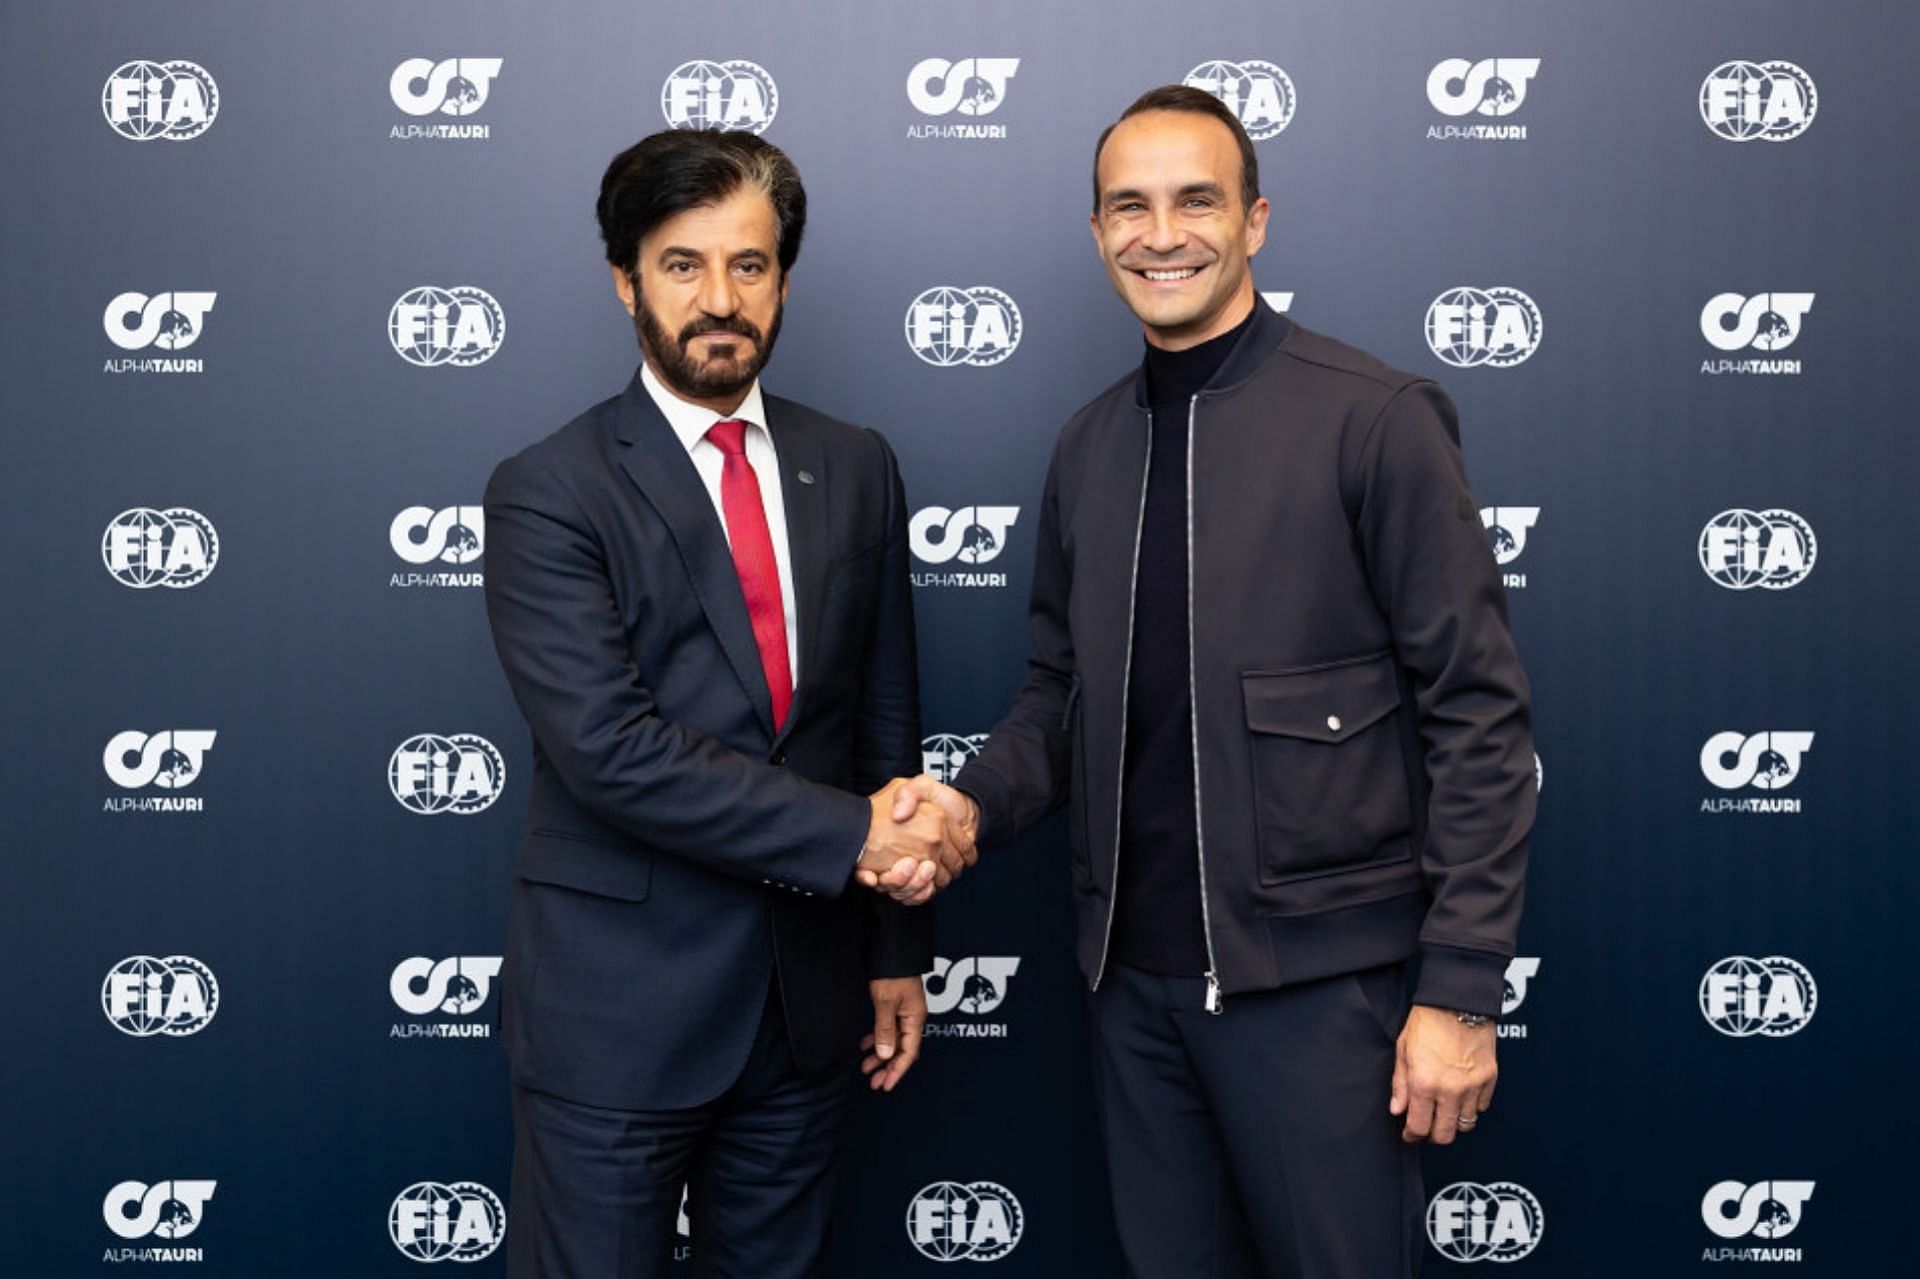 Mohammed Ben Sulayem (L) and Ahmet Mercan (R) (Image via FIA.com)